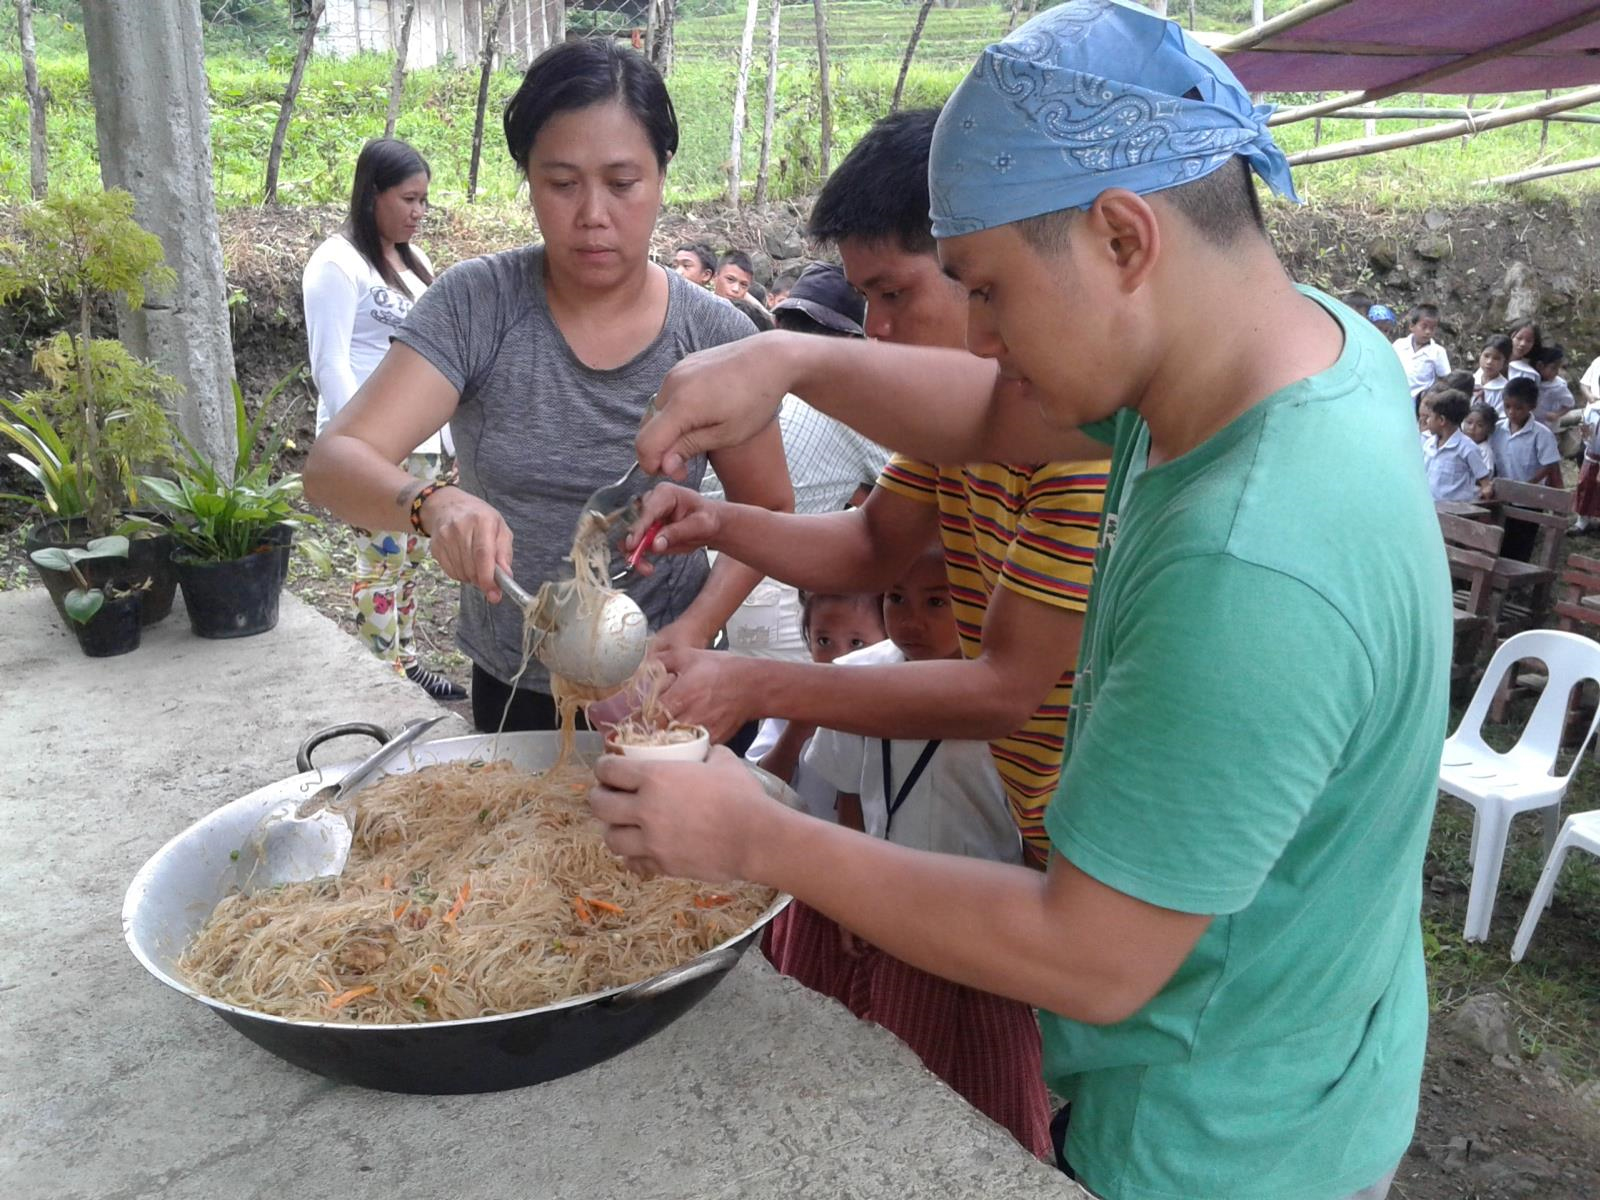 Donate to the Missionaries of the Sacred Heart and help feed families in the Philippines.